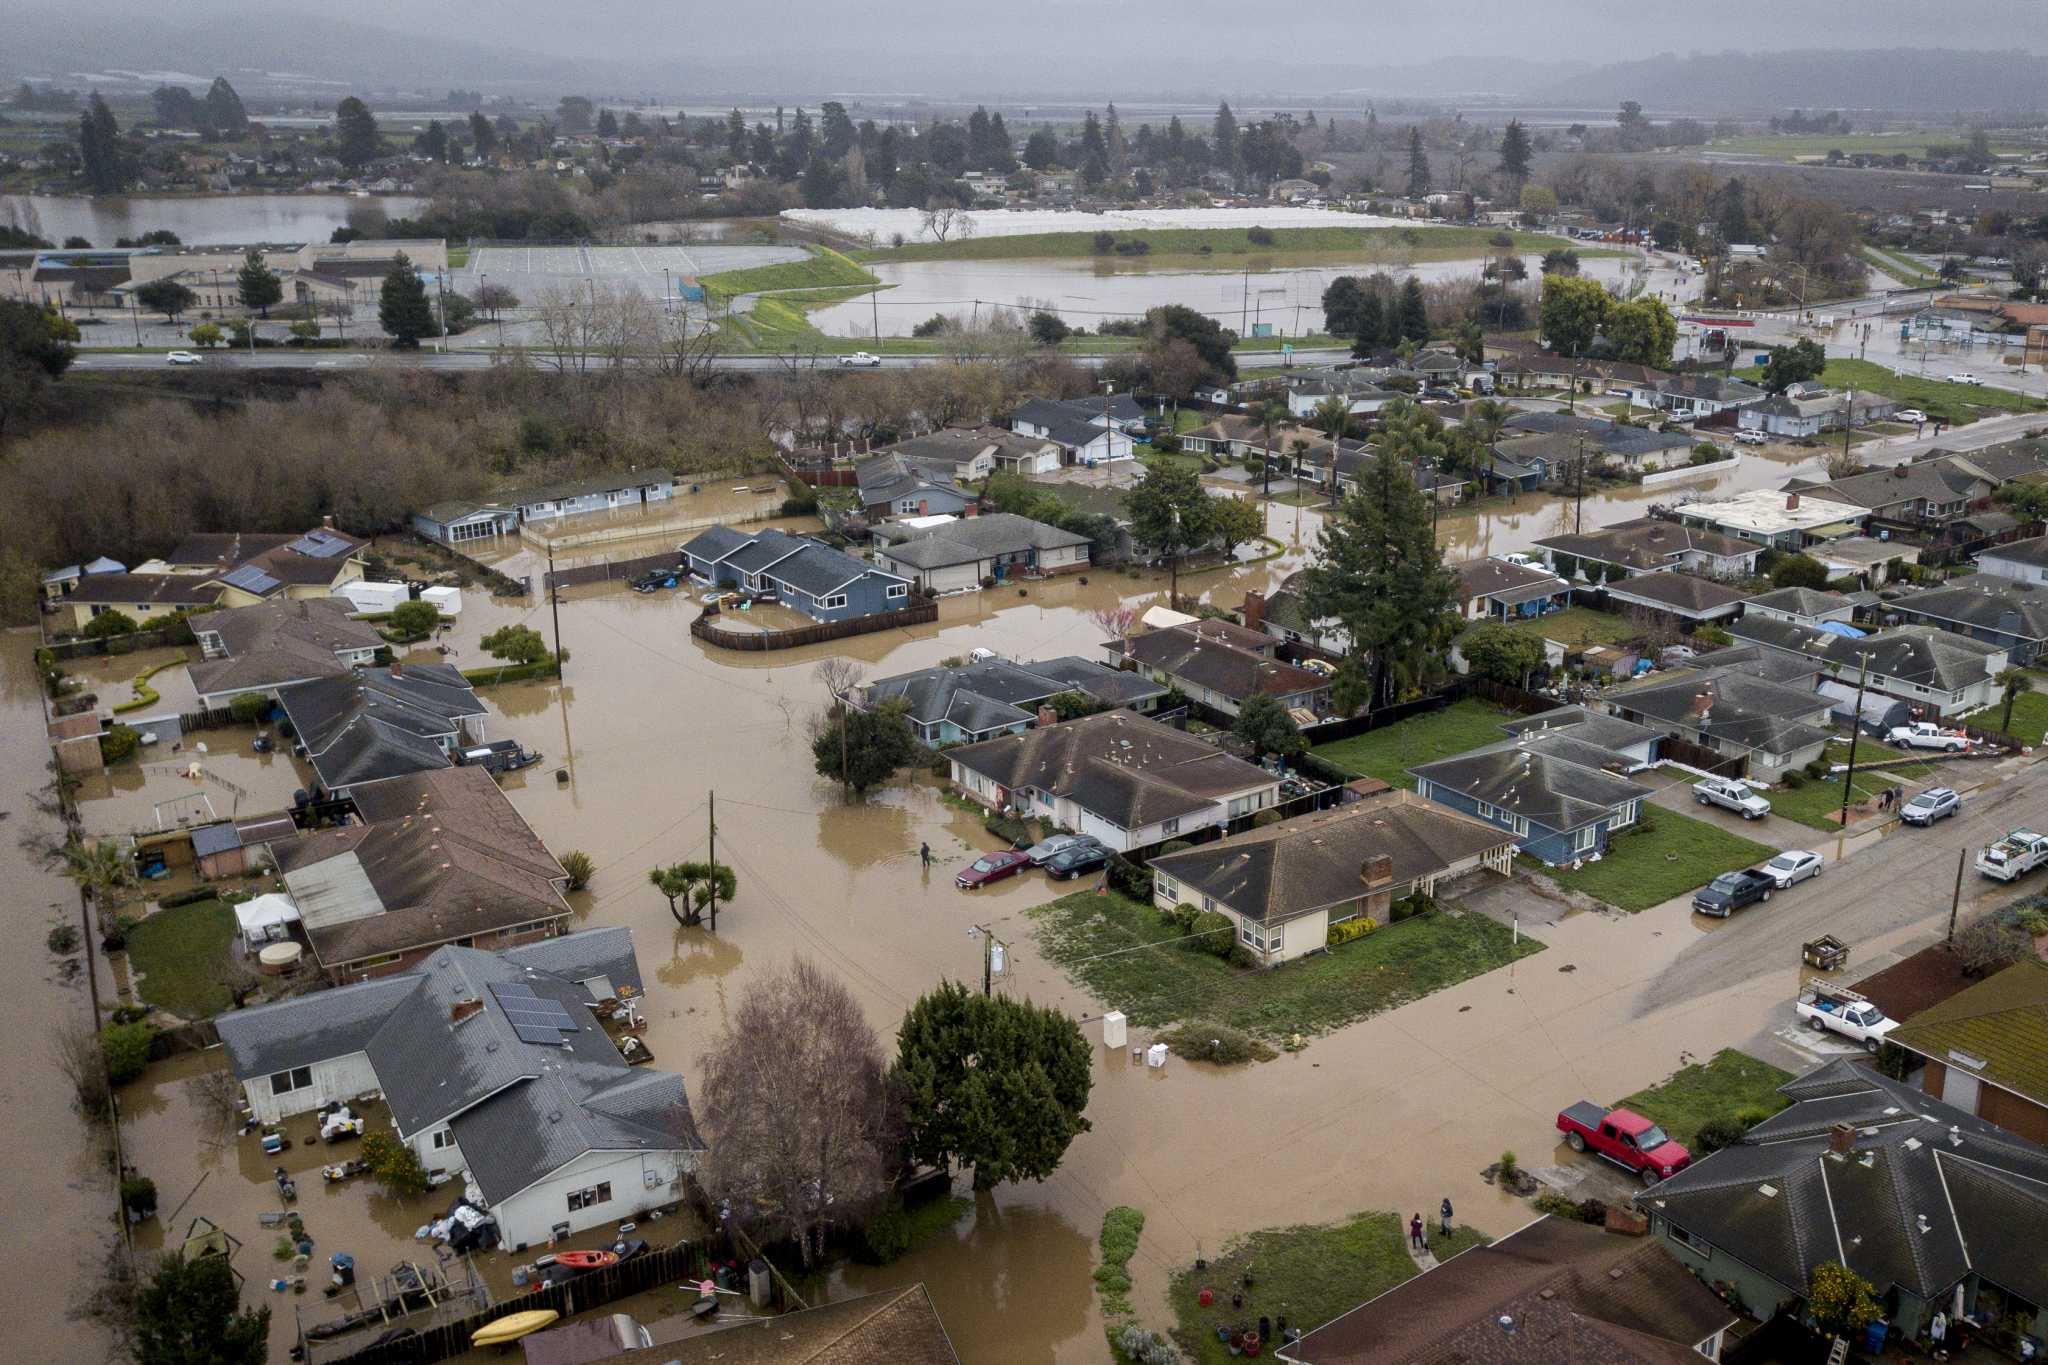 One in 5 California schools located in moderate or high flood risk areas